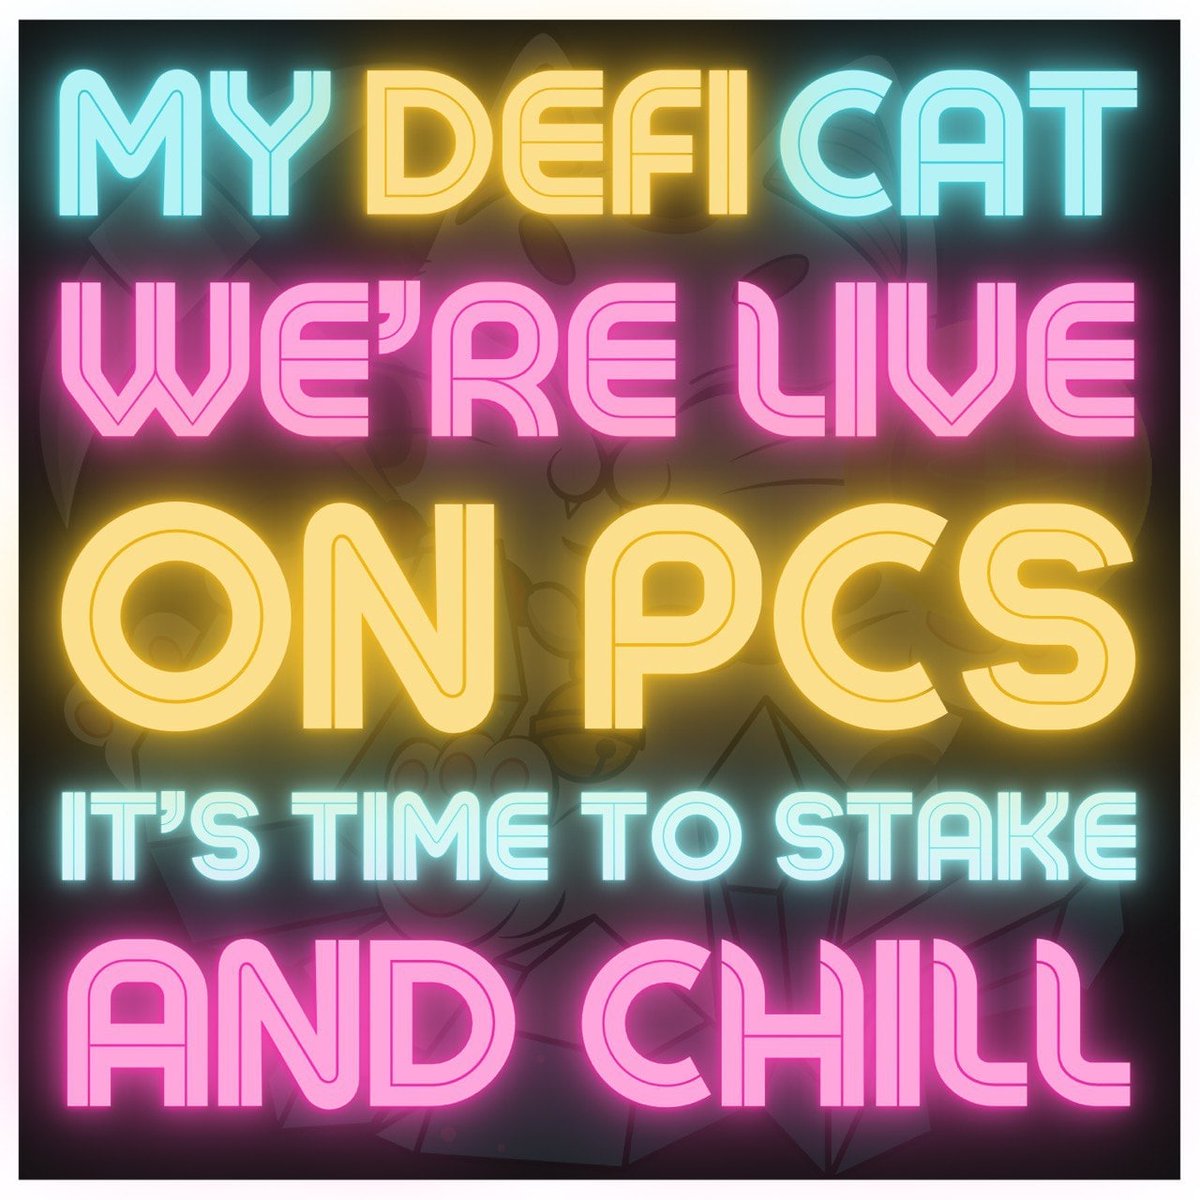 📣PCS LIVE & STAKING LIVE 📣 The moment is finally here; WE’RE ON PCS! Claim your tokens on the presale page AND STAKE stake your $MDC to earn USDT rewards AND reflections. 👉 MORE HODLERS = MORE PROFIT 👉 MAKE DECISIONS WITH LOGIC 👉 DON’T BE CONTROLLED BY FEAR #DeFi